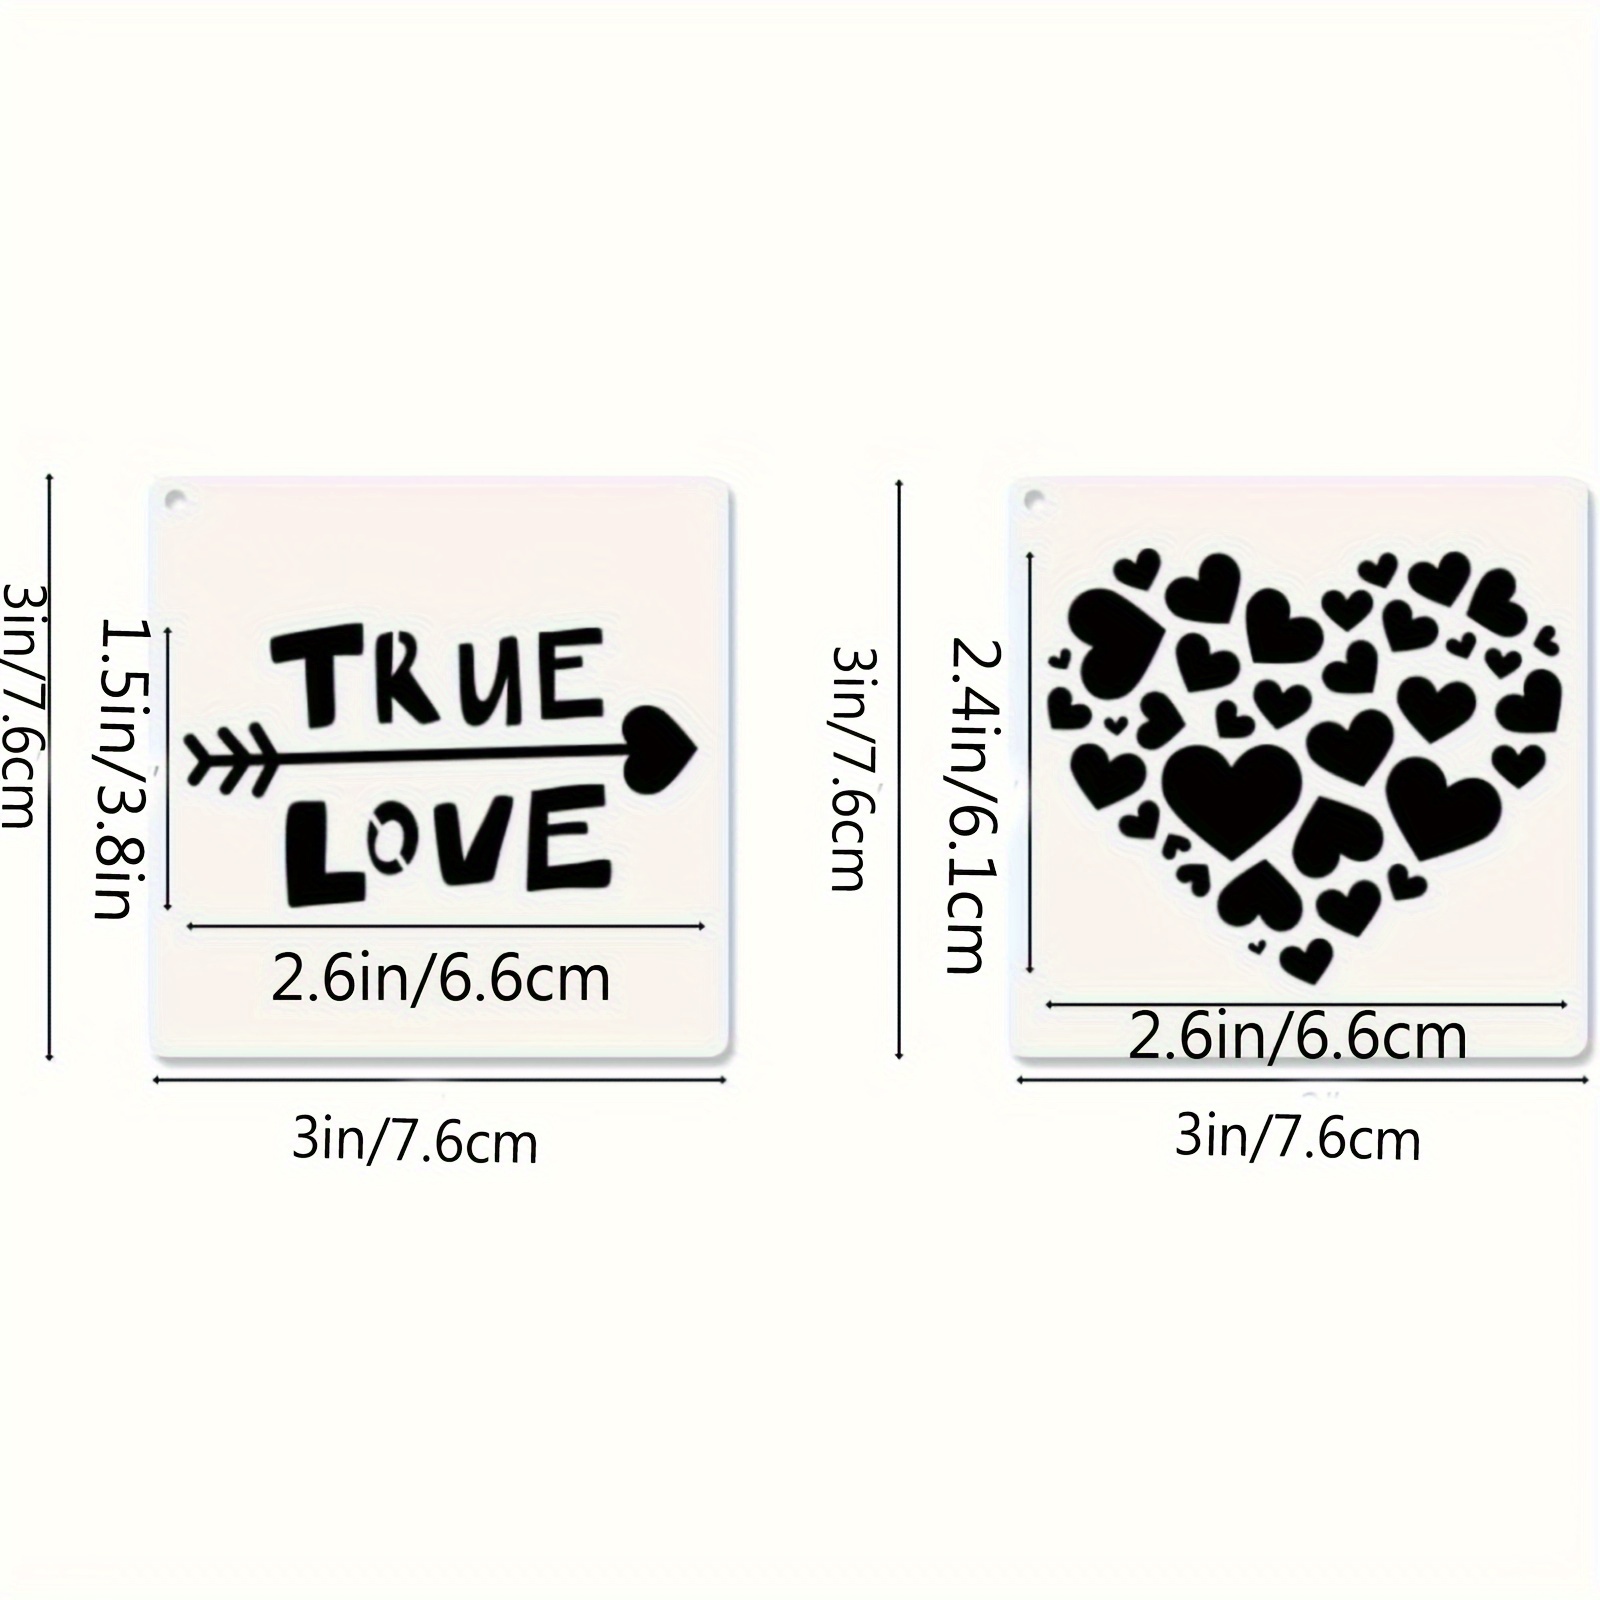  30 Pcs Valentine's Day Heart Love Stencils, Love Stencils for  Painting on Wood Slice, Reusable Plastic Templates for Valentine's Day  Wedding Envelopes Scrapbook Making, Art & DIY Crafts 3x3 Inch 